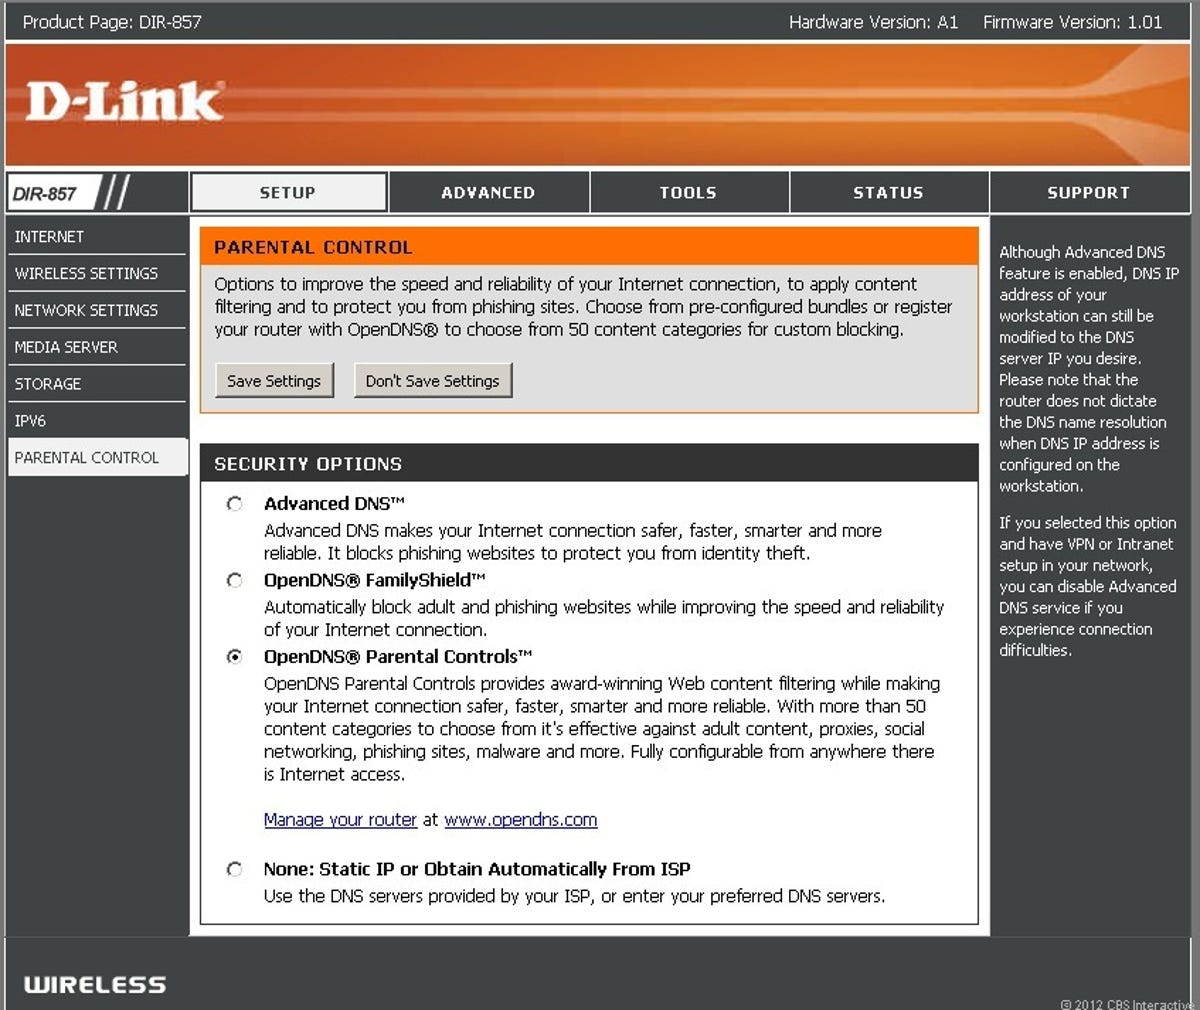 The DIR-857's Web interface is similar to that of other D-Link routers: organized, responsive, and easy to use.